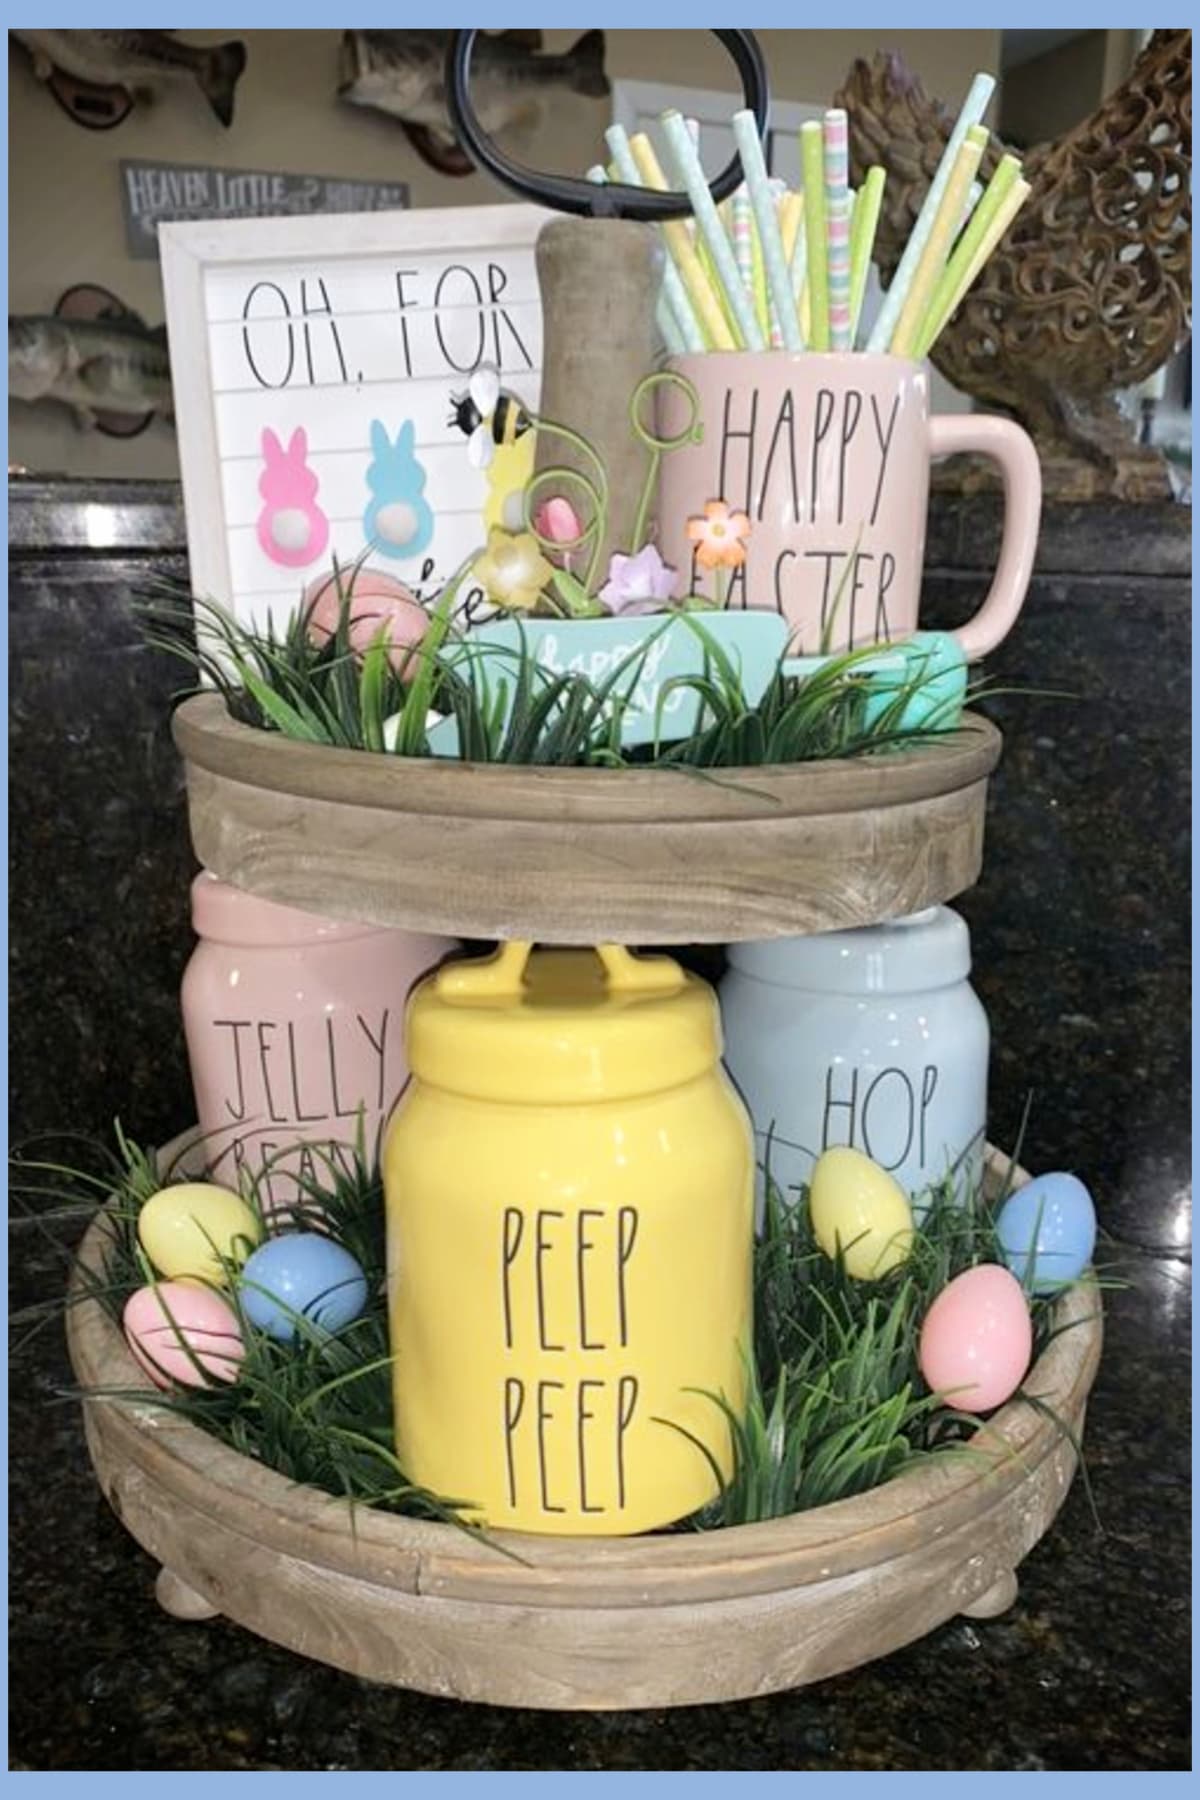 Easter wood tray centerpiece ideas - wooden tiered tray decorating ideas for Easter Spring decor